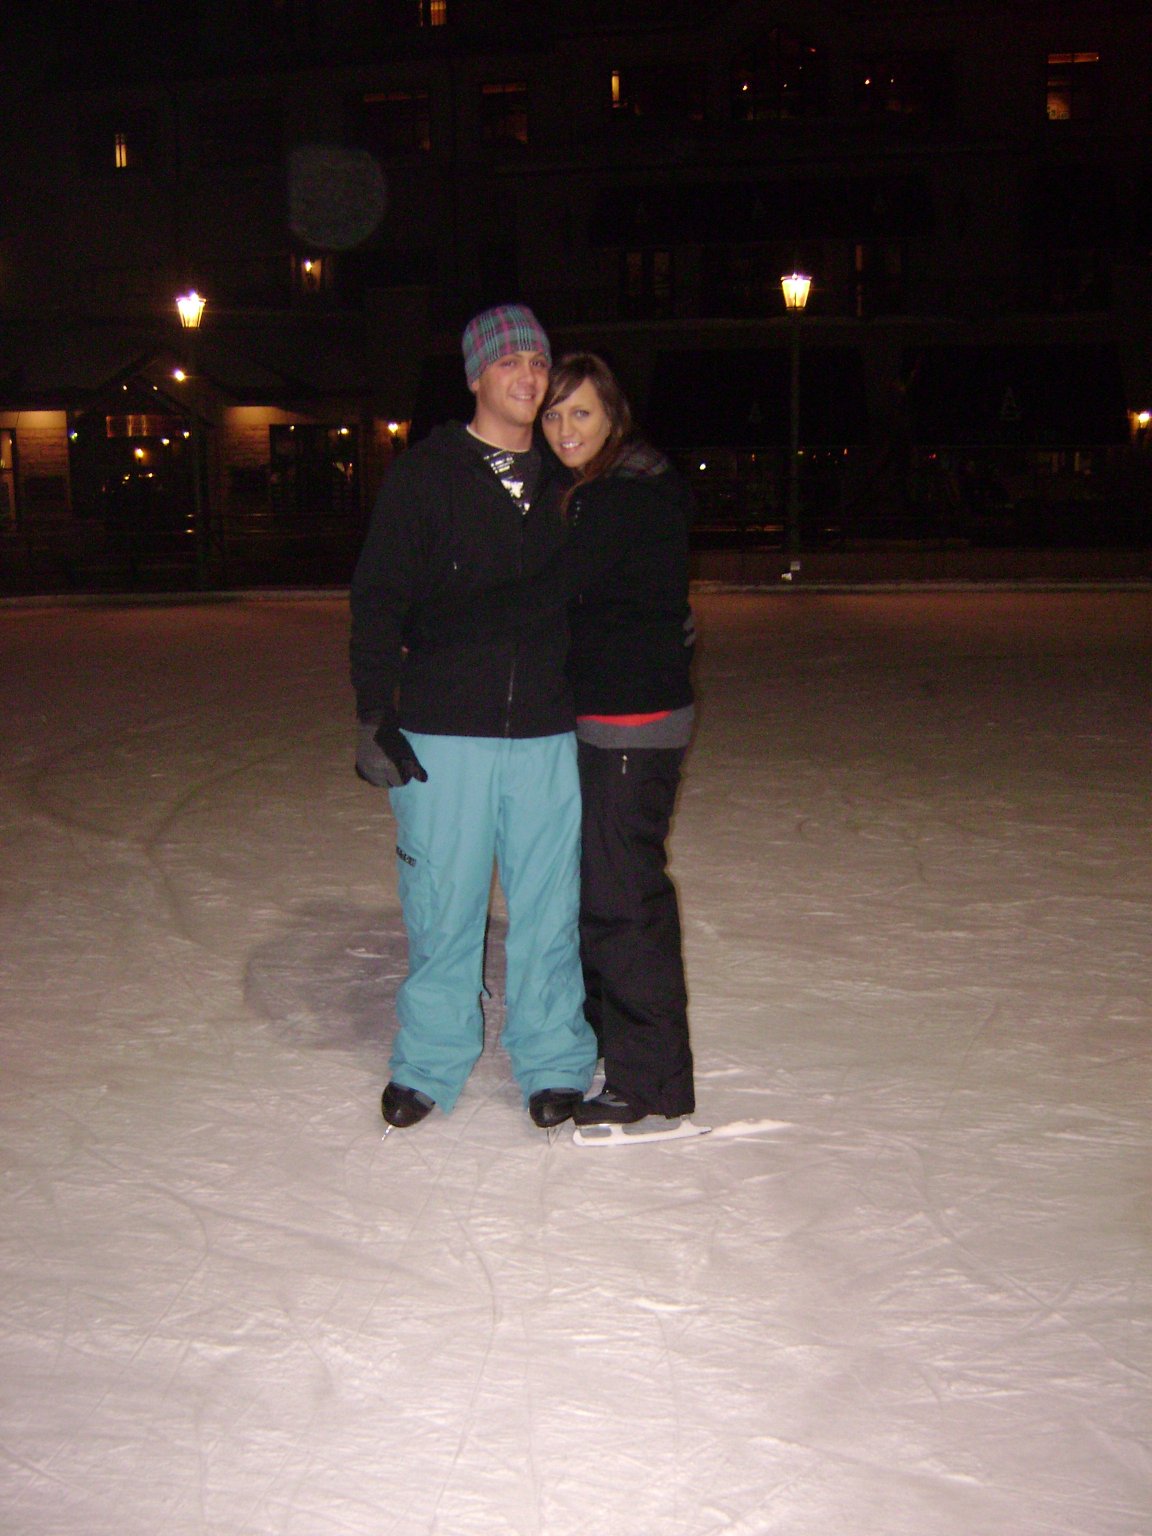 Our first time ice skating